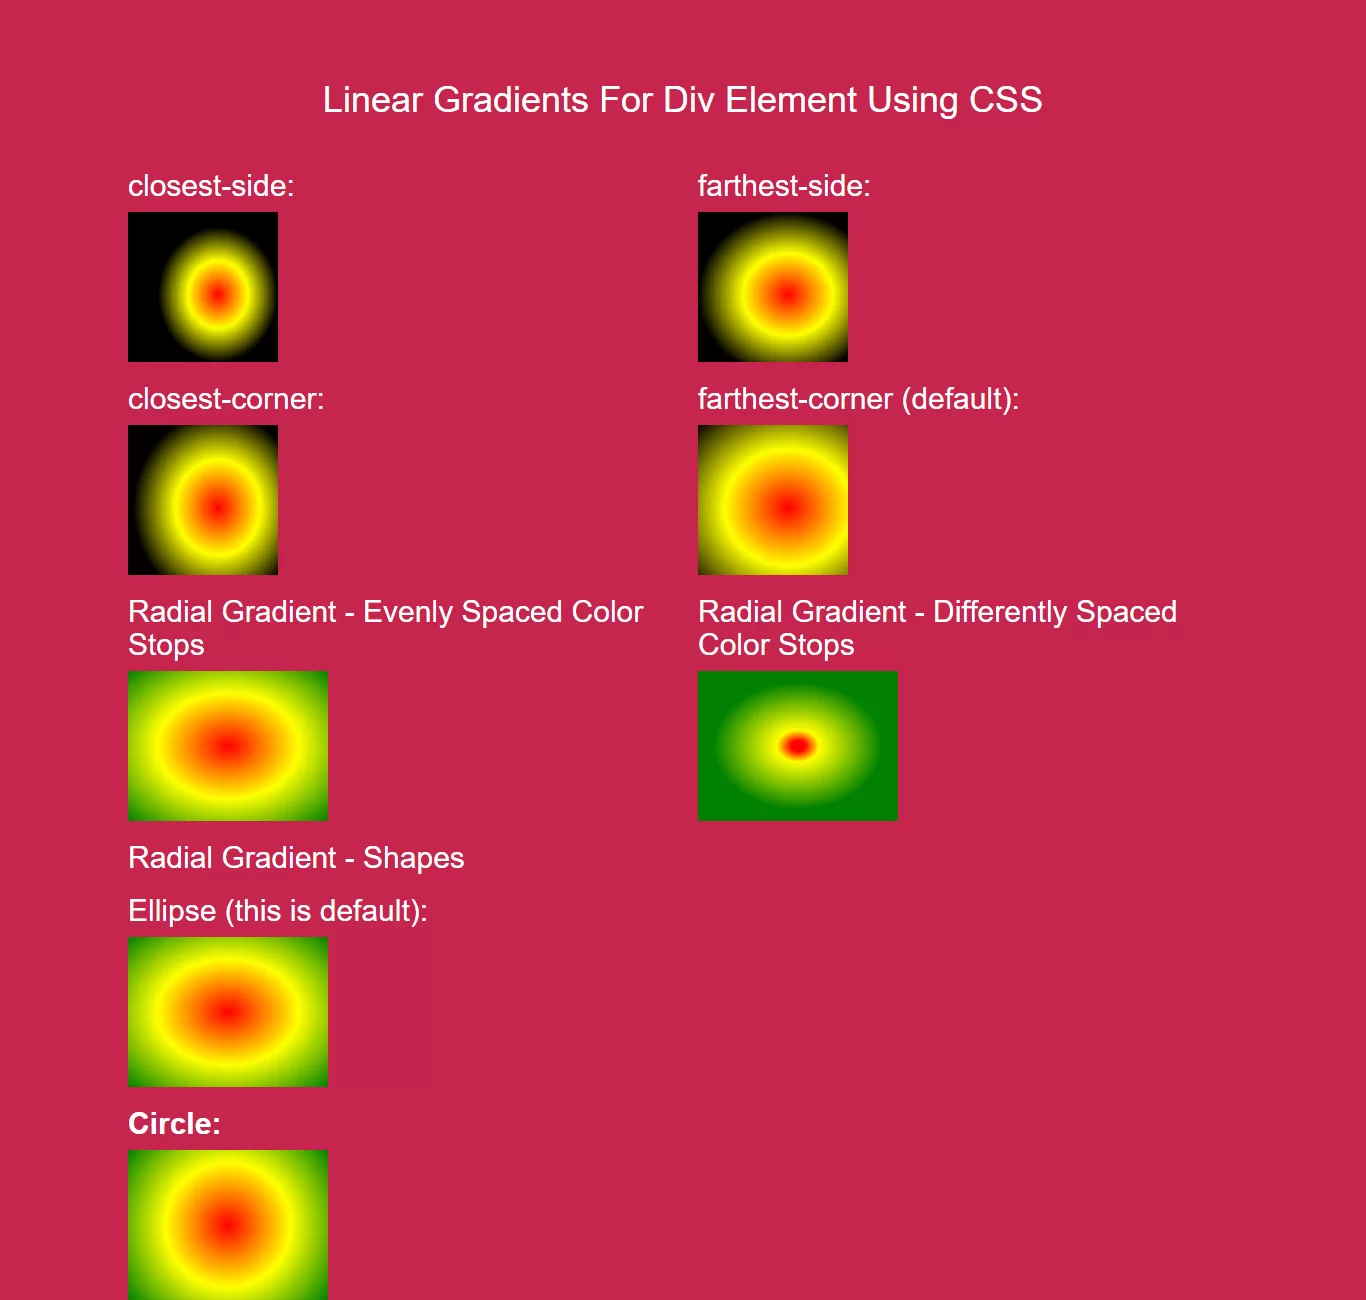 How To Set Radial Gradients For Div Element Using CSS